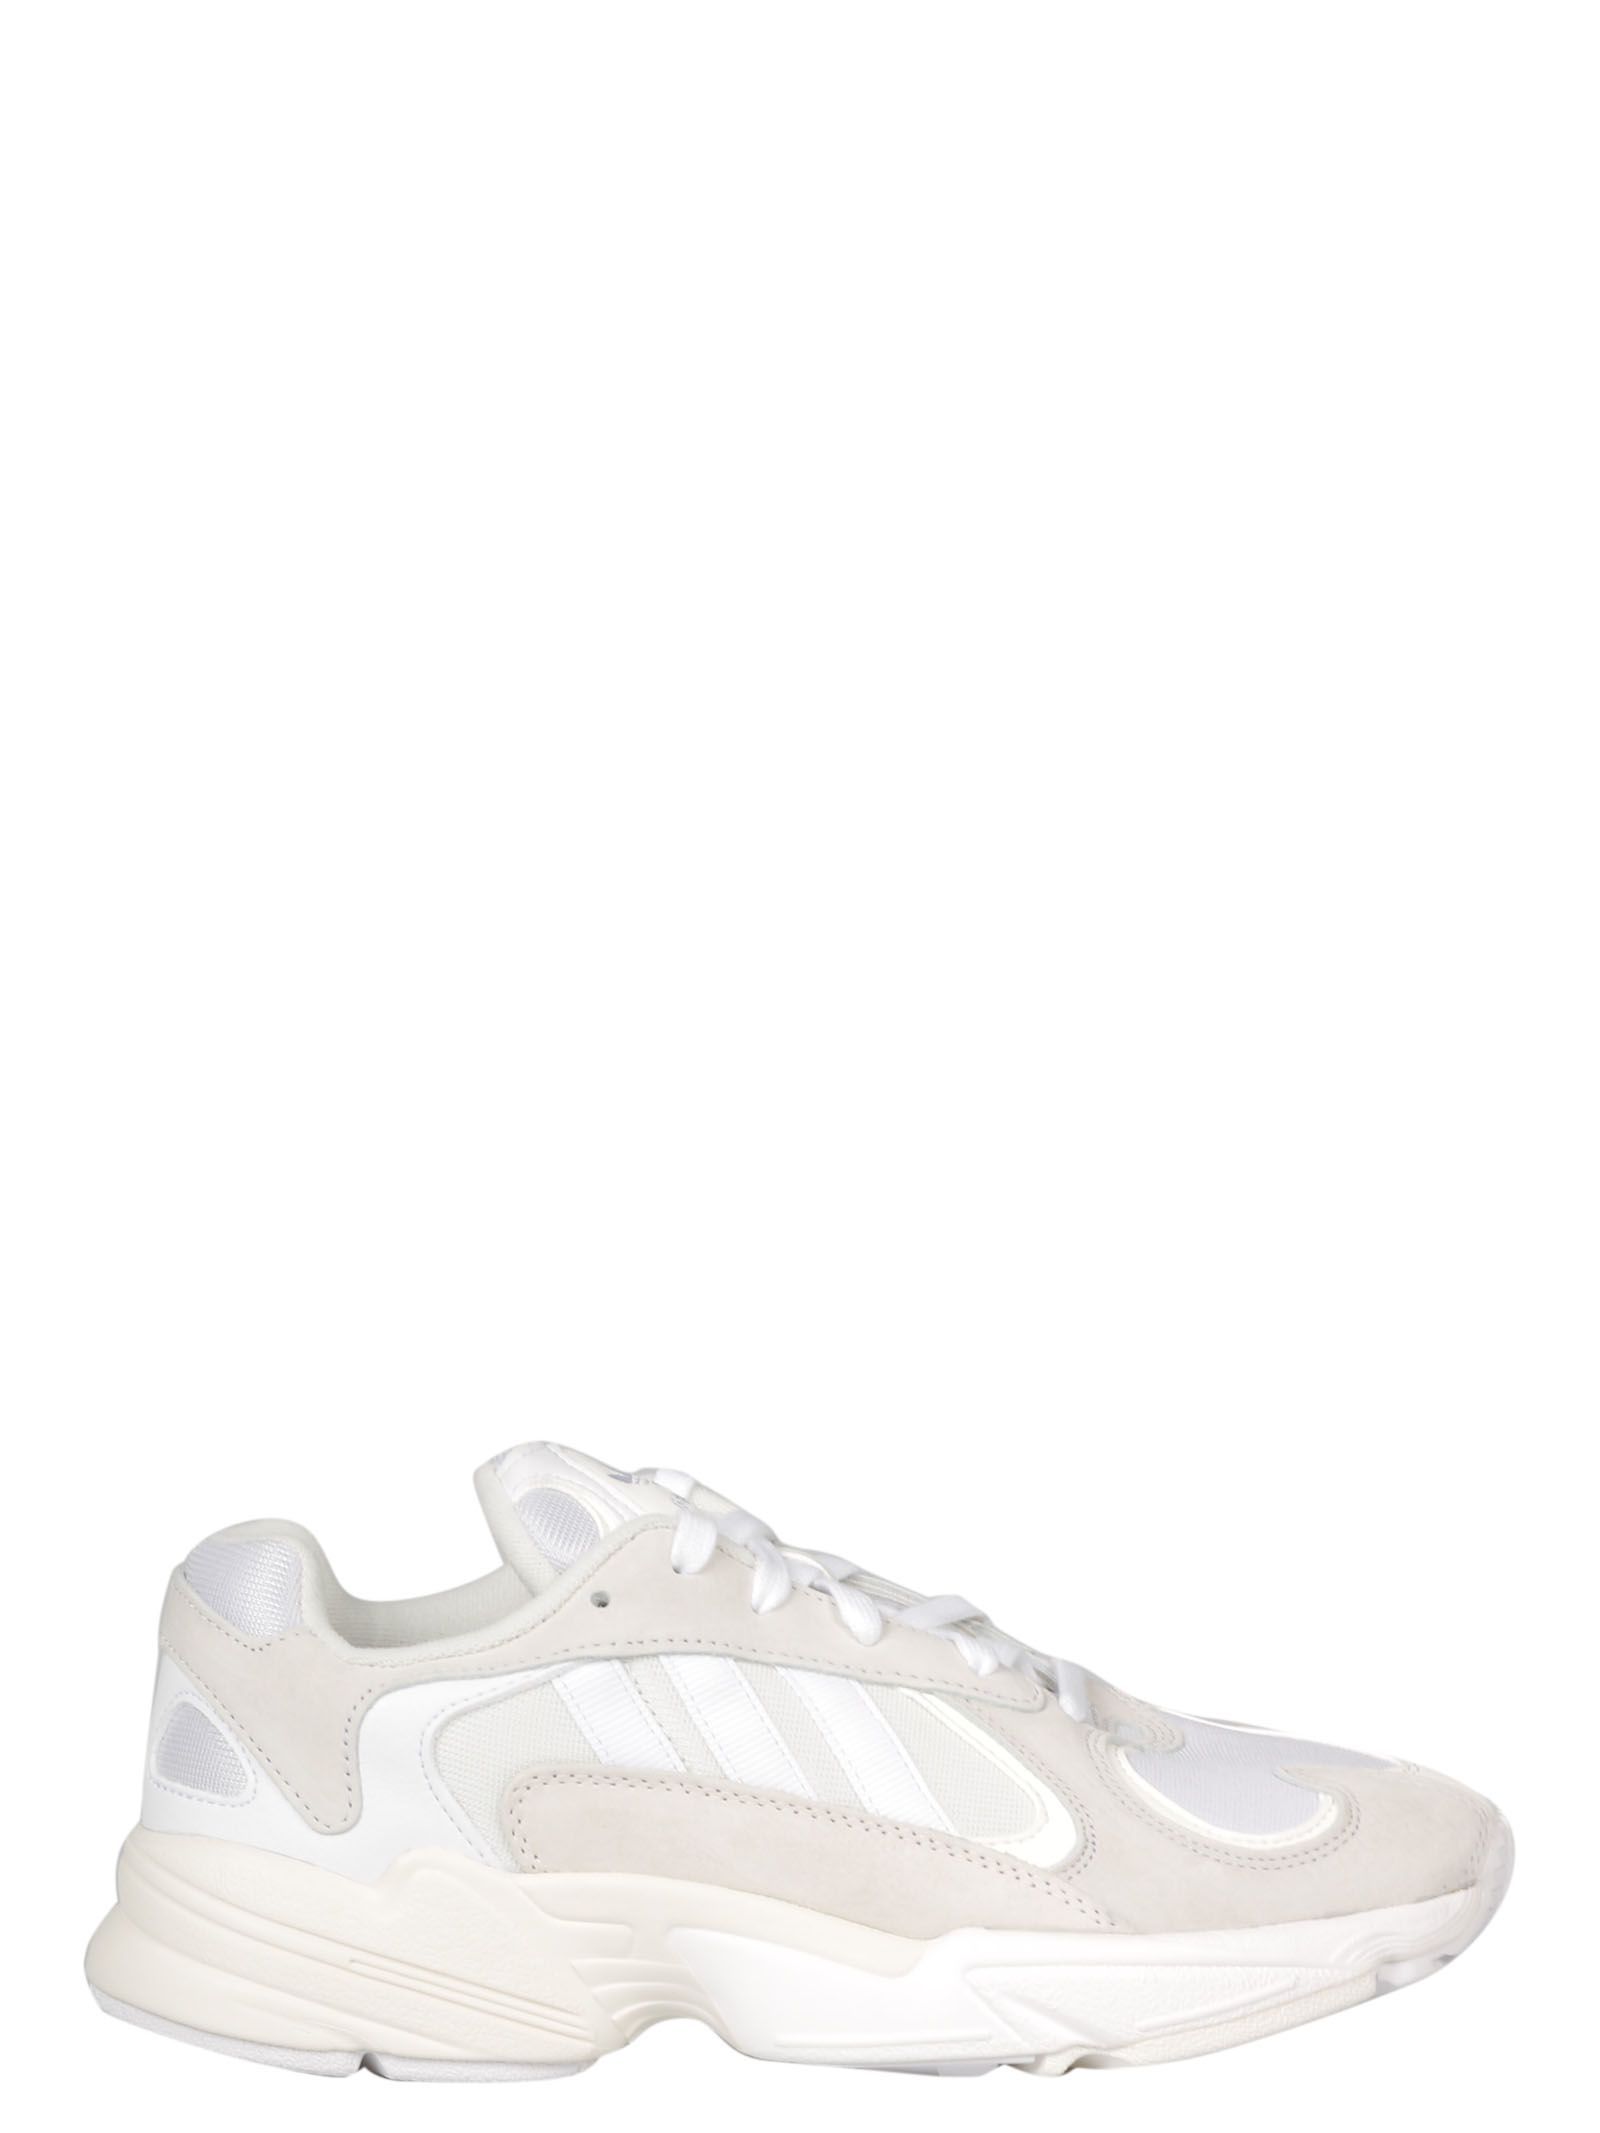 Adidas Yung-1 Sneakers | Italist.com US